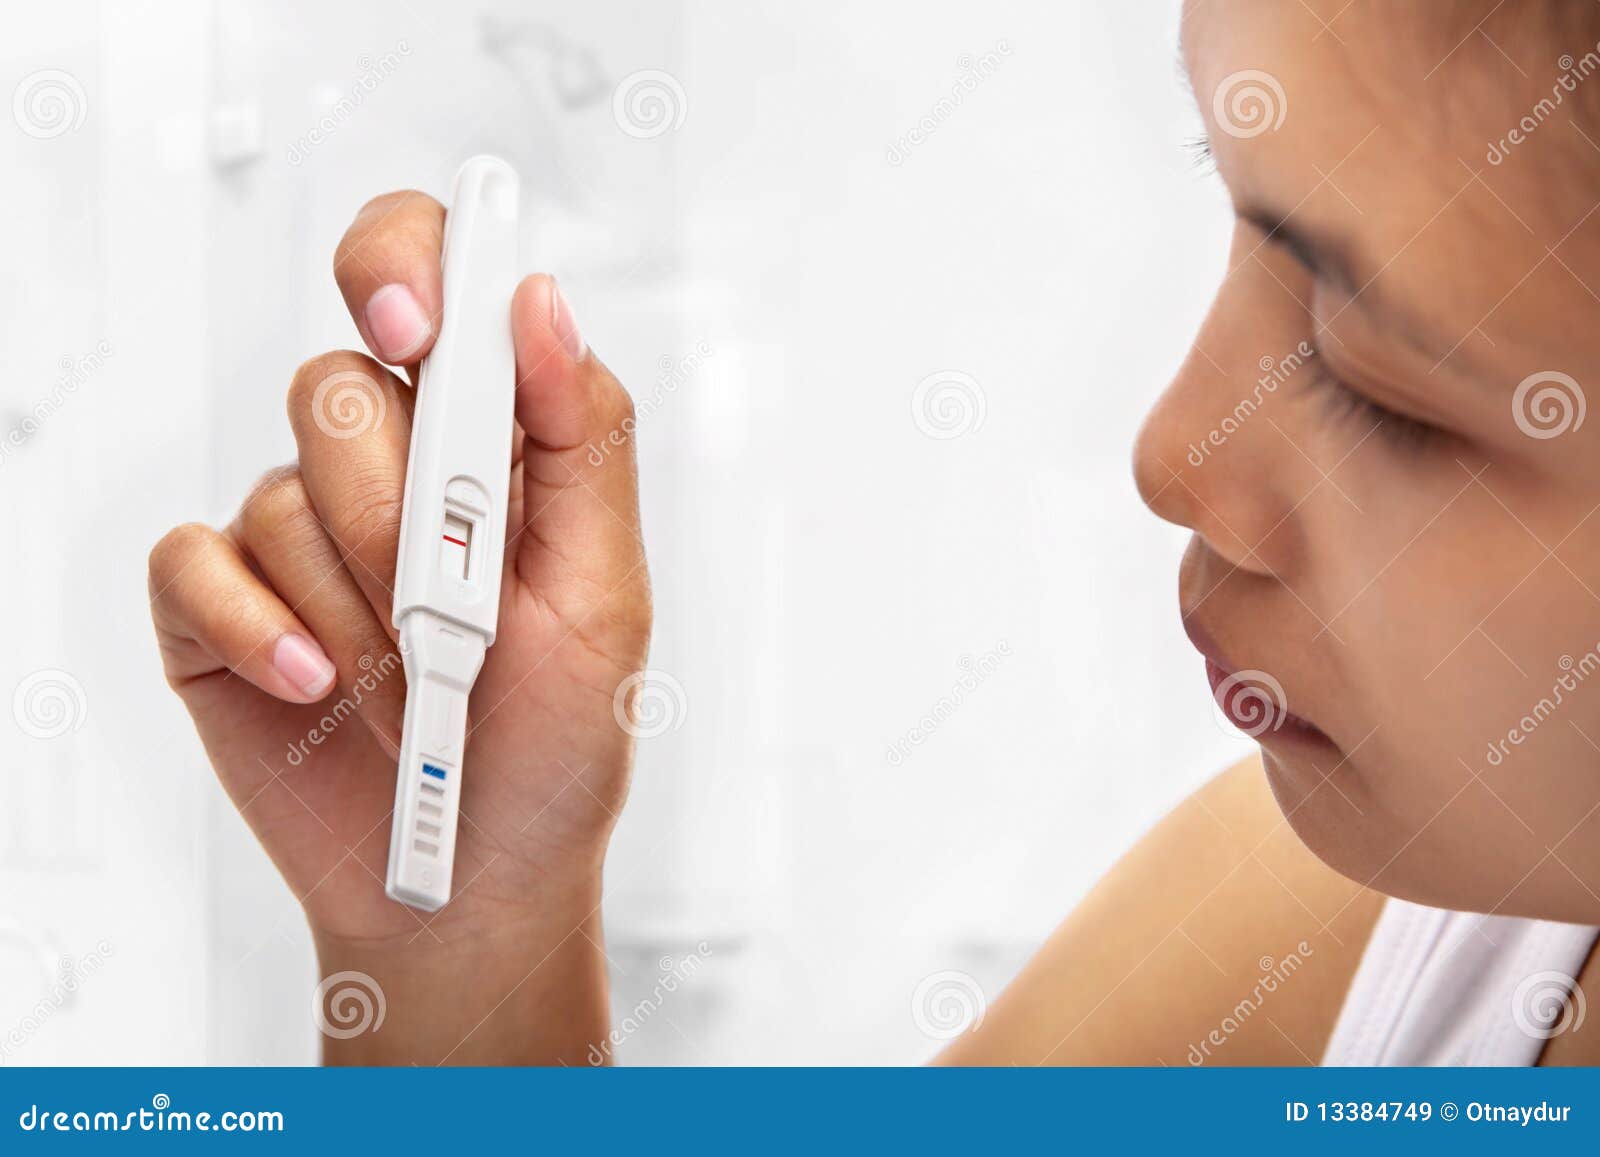 woman holding negative pregnant test result